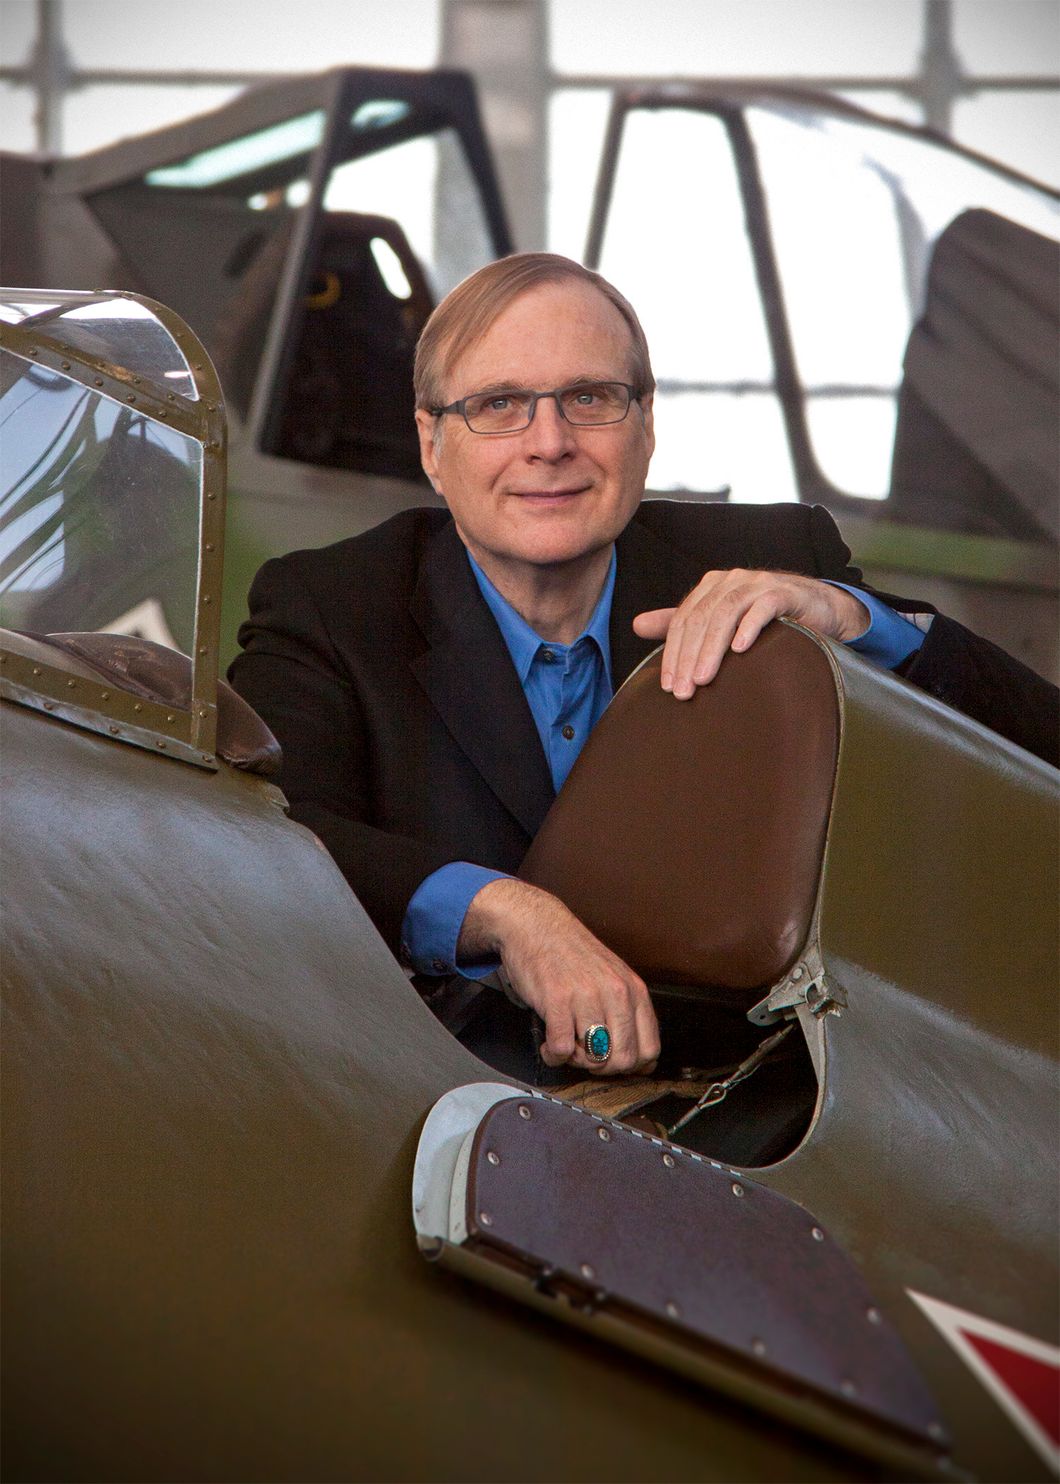 Paul Allen's Philanthropic Spirit Meant A Lot To Us In the Pacific Northwest—You'll Be Missed